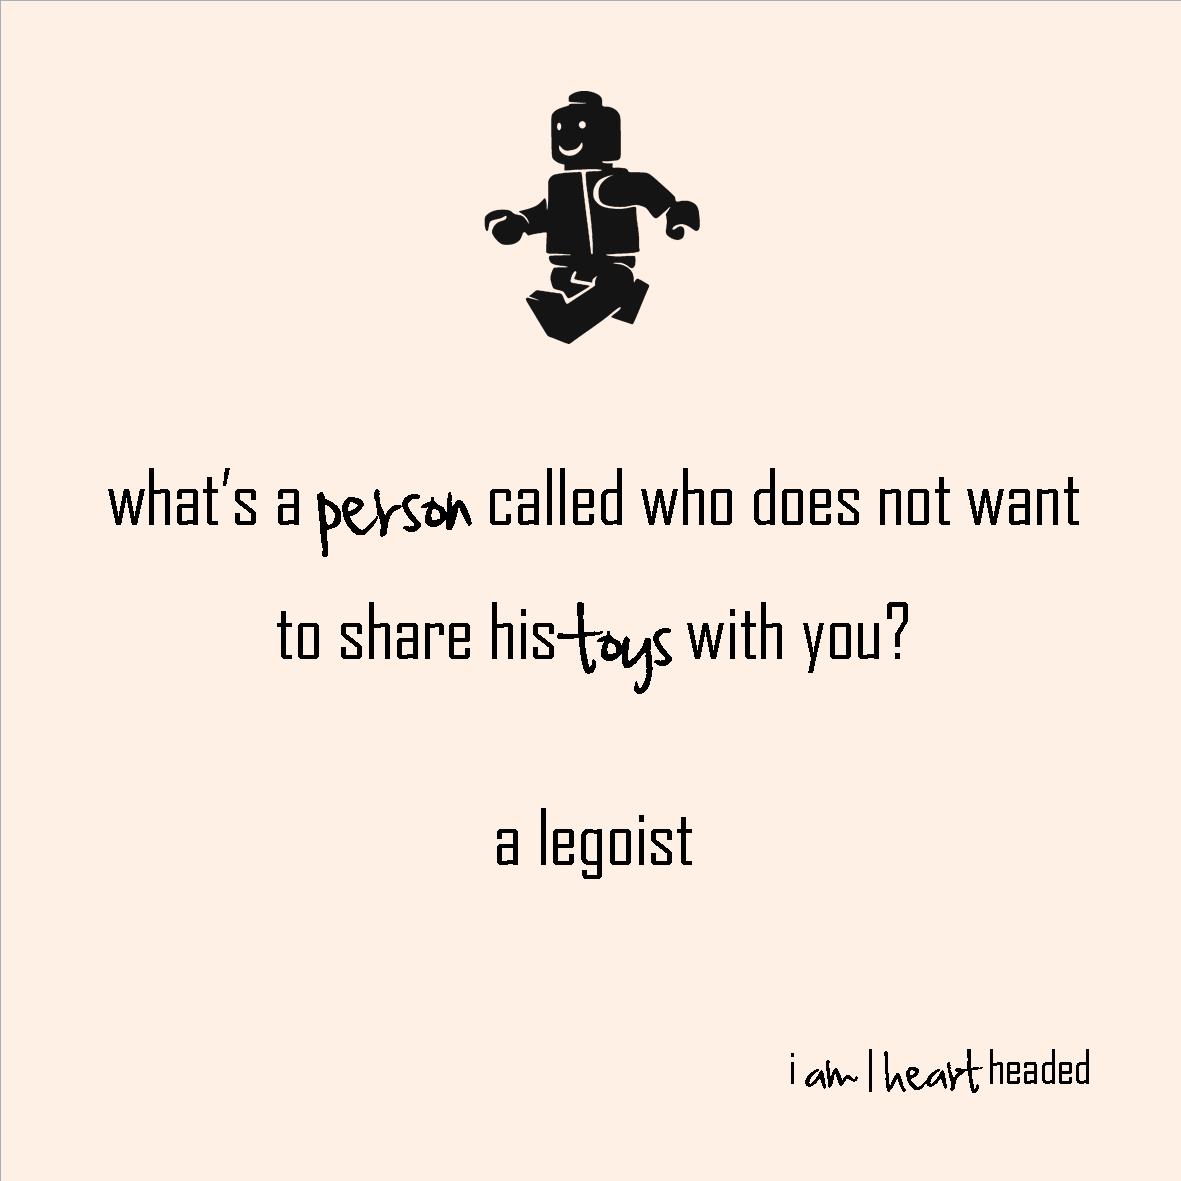 full-size featured image of quote 'legoist' in category 'witty' at i am | heart headed